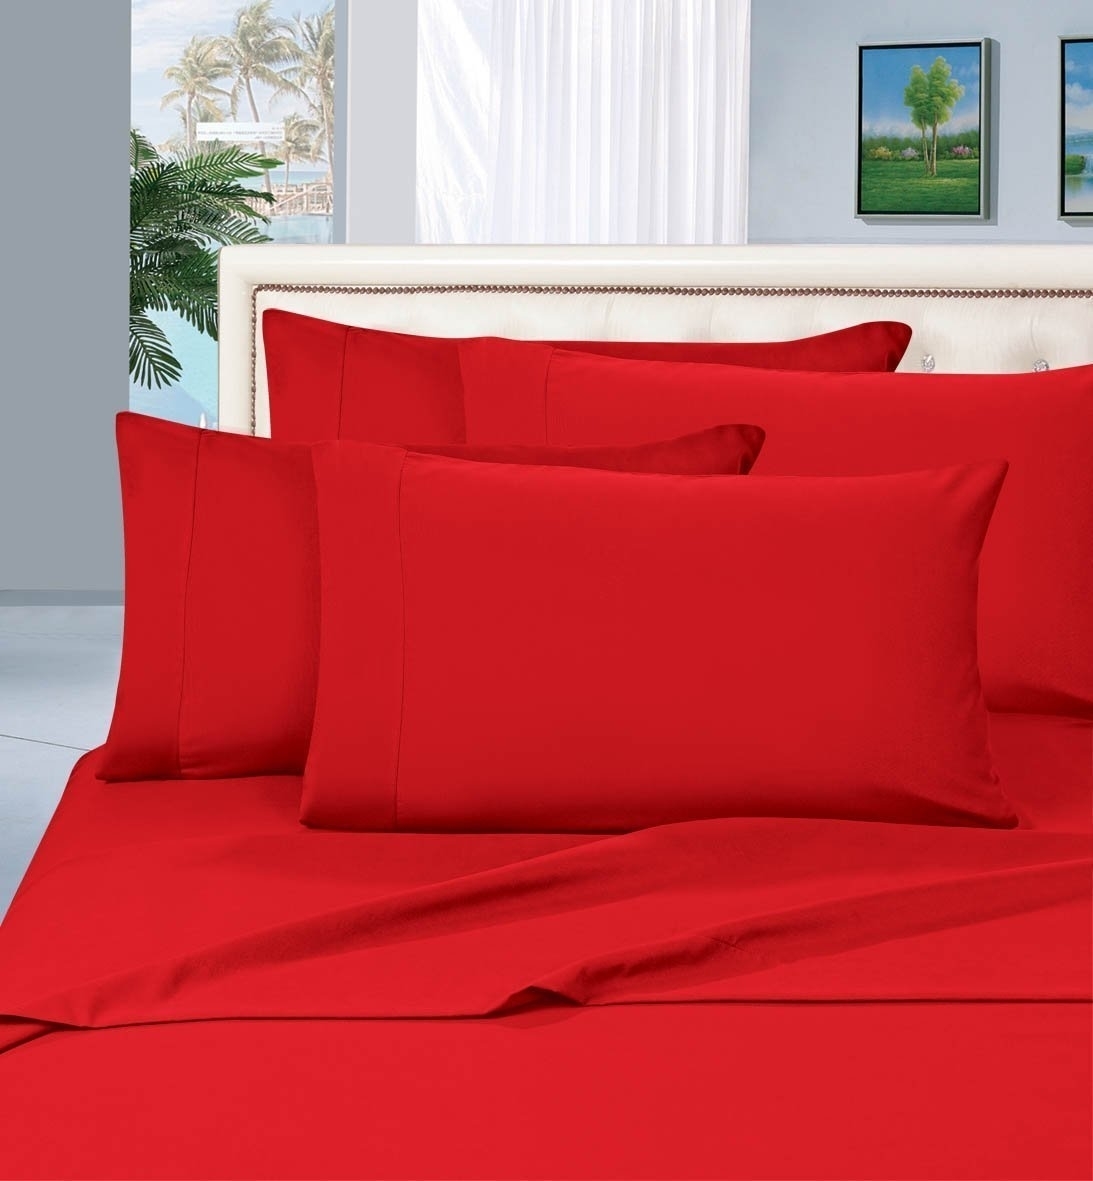 Elegant Comfort 1500 Series Wrinkle Resistant Egyptian Quality Hypoallergenic Ultra Soft Luxury 3-piece Bed Sheet Set, Twin, Red